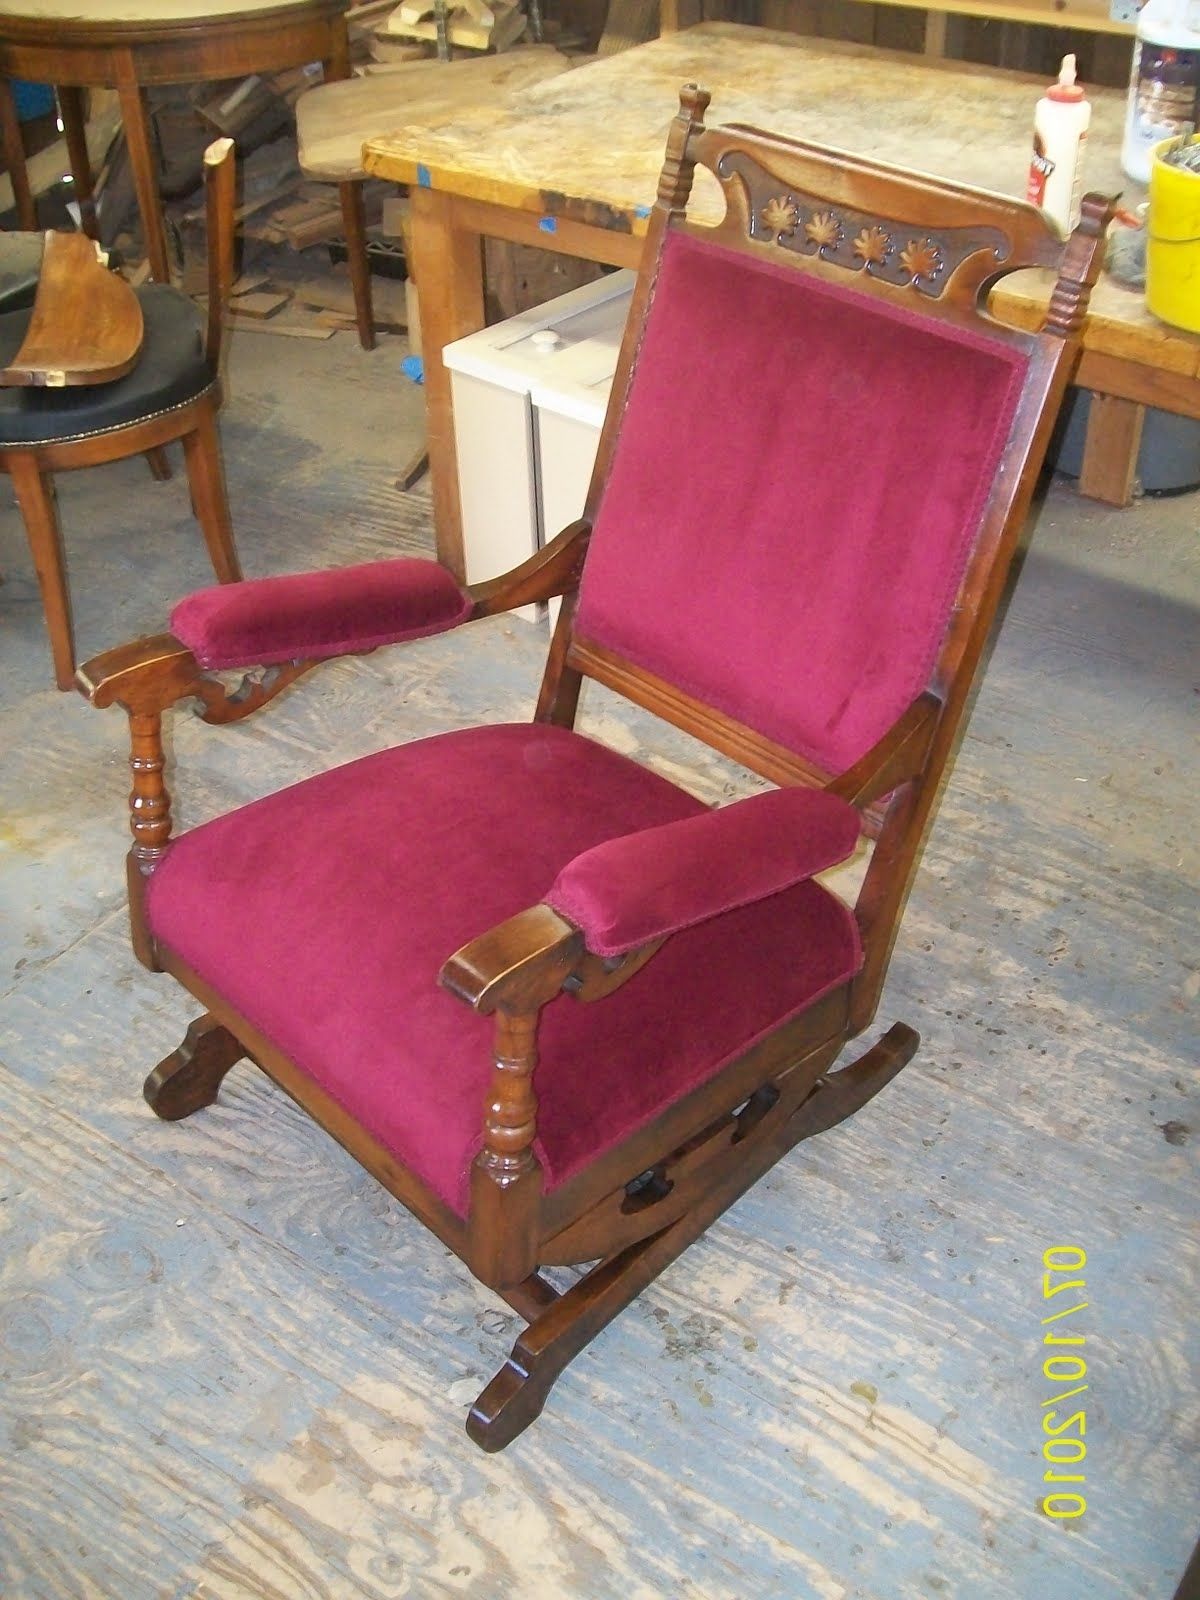 Newest John Mark Power Antiques Conservator Eastlake Style Rocker On With Rocking Chairs With Springs (View 10 of 20)